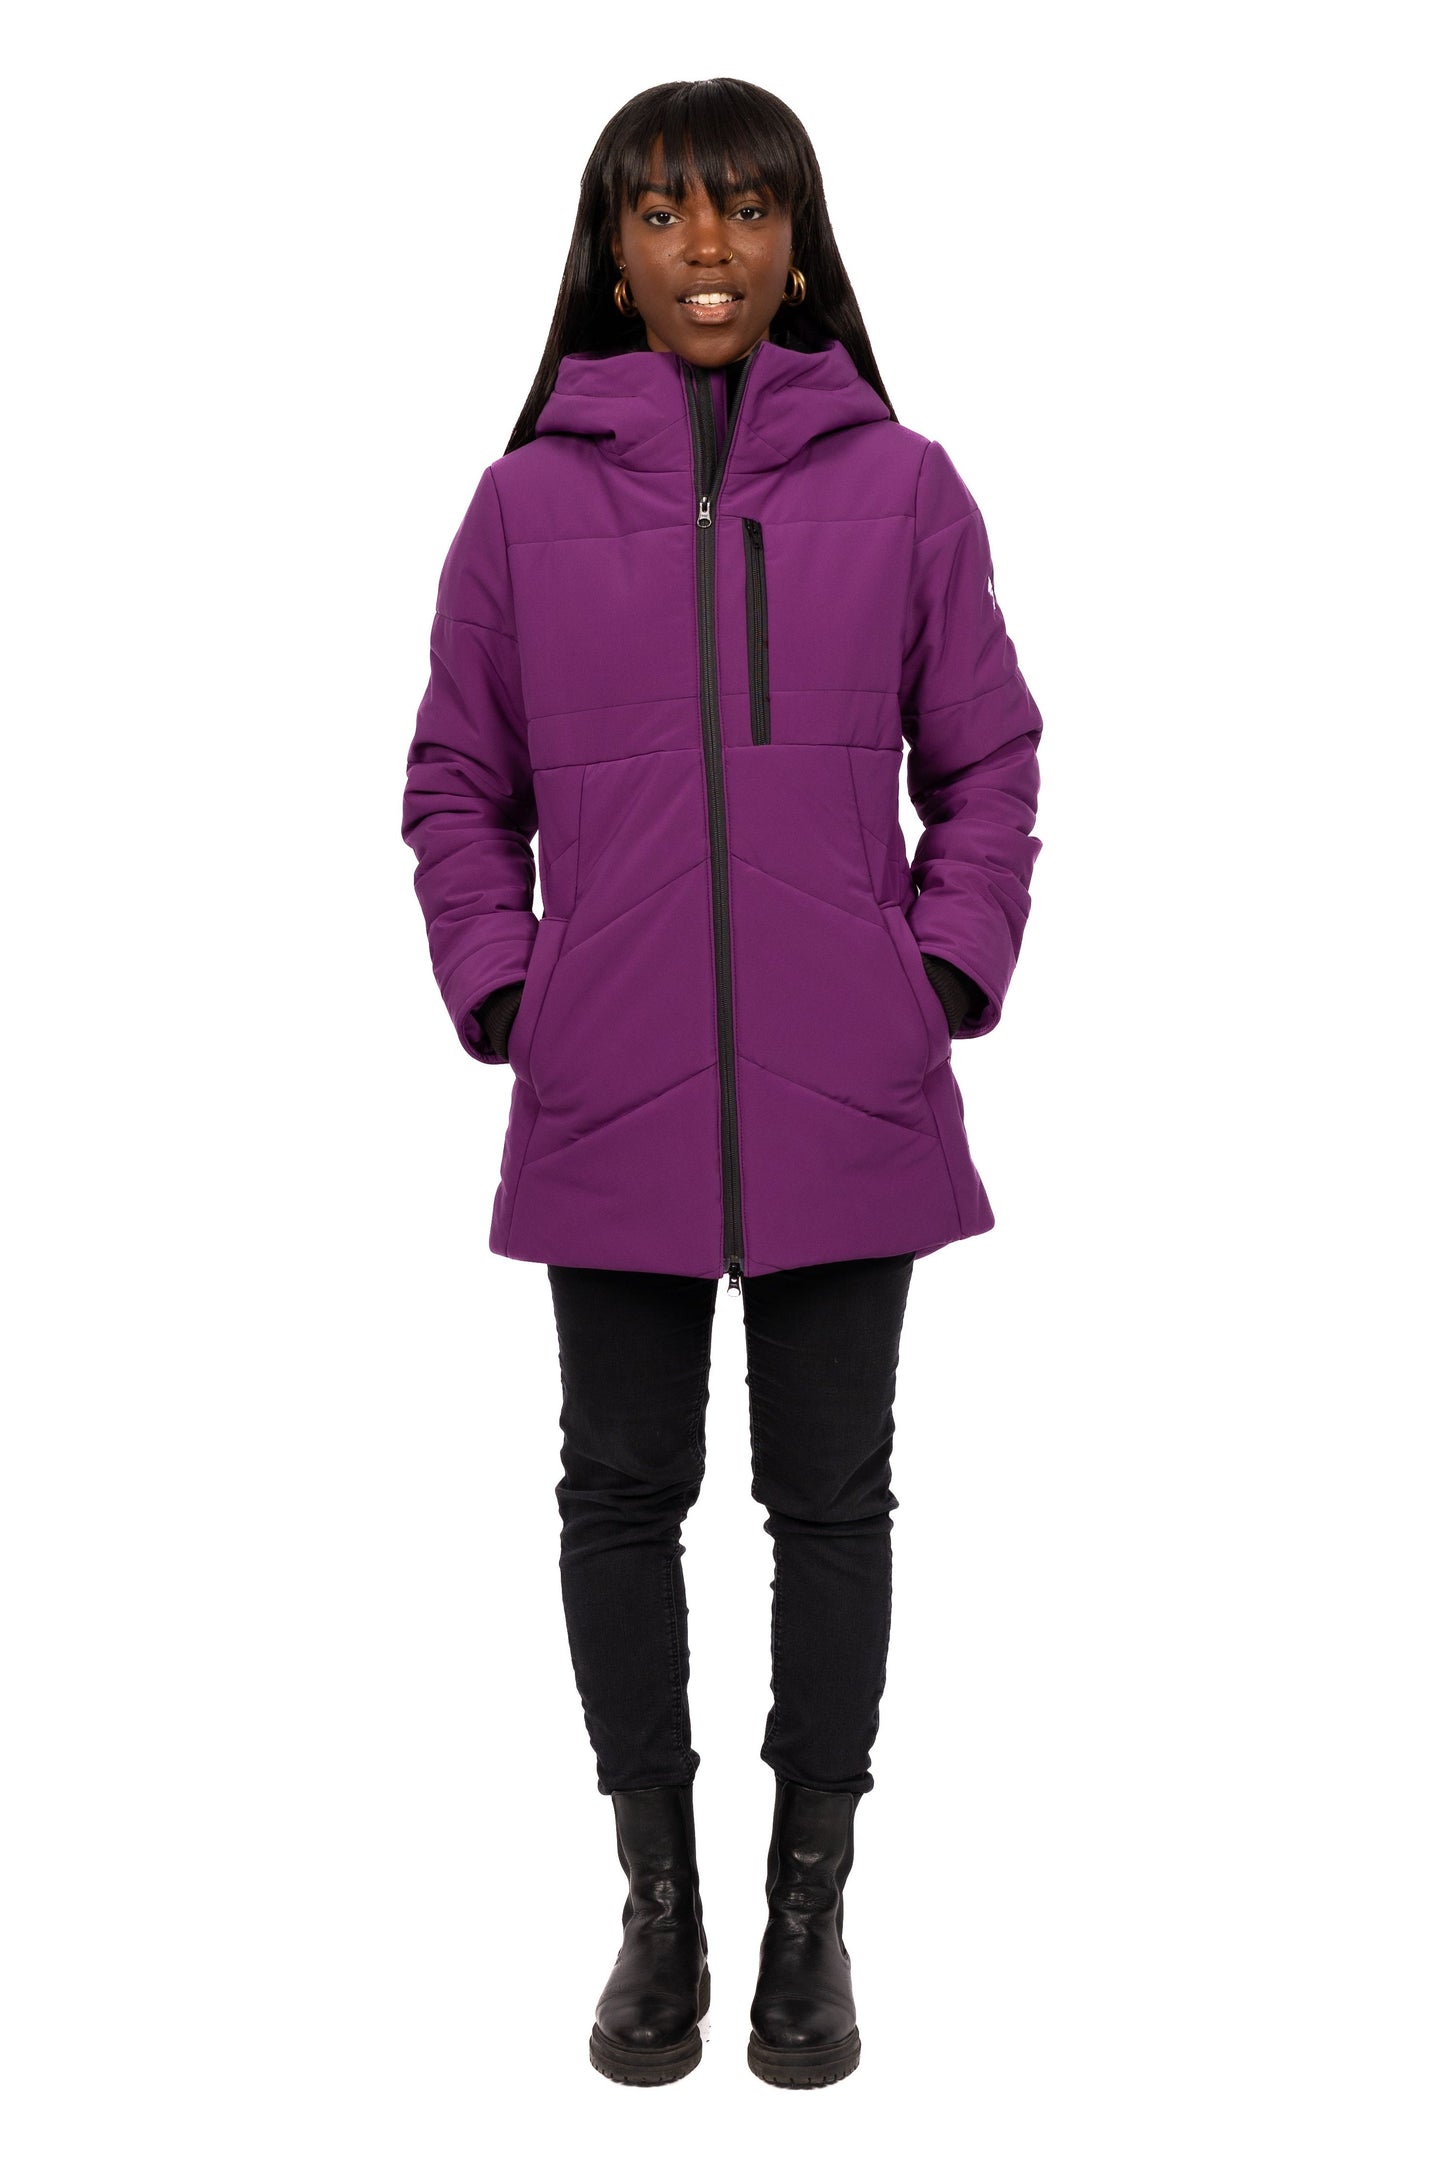 Desloups mid-length women's parka fitted in Isosoft 250g